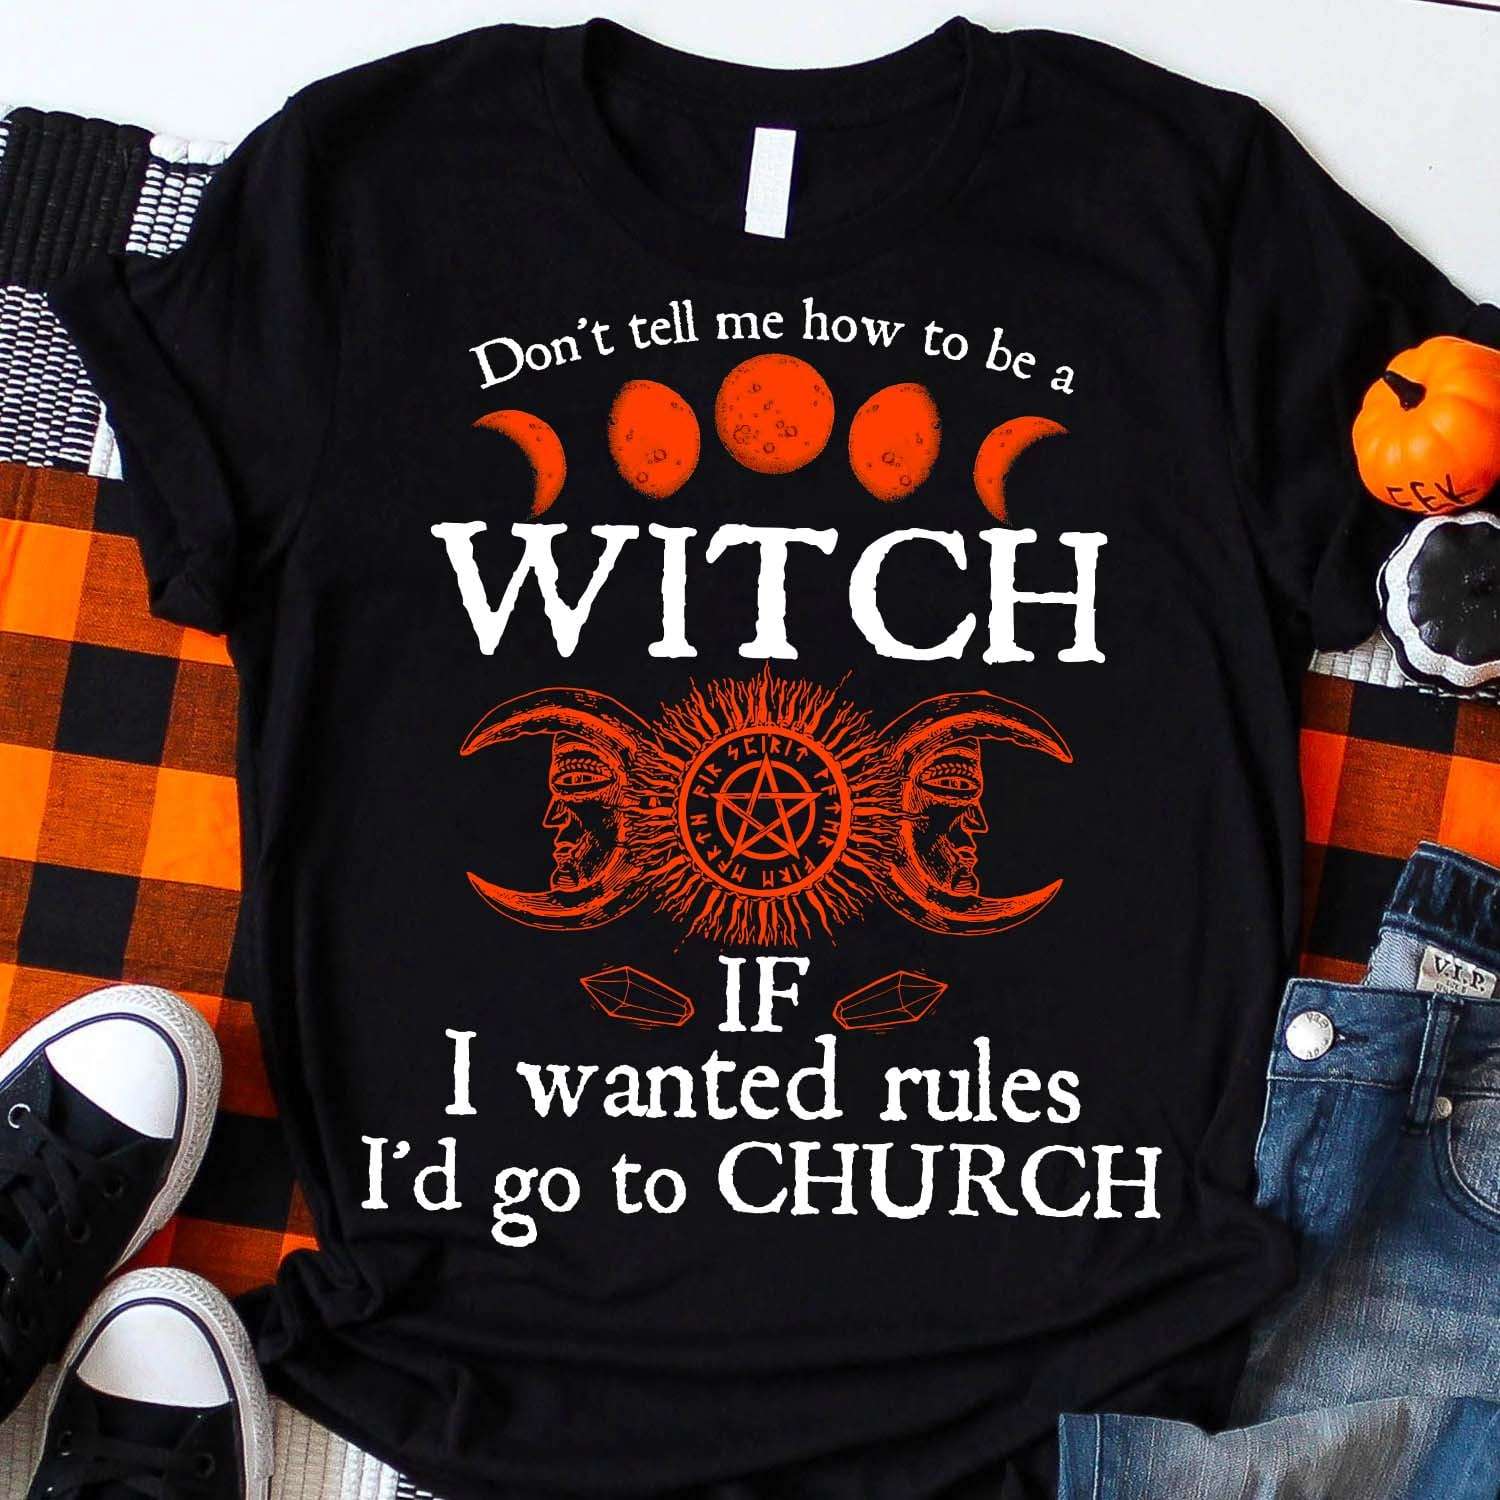 Don't tell me how to be a witch if I wanted rules I'd go to church - Witch rules